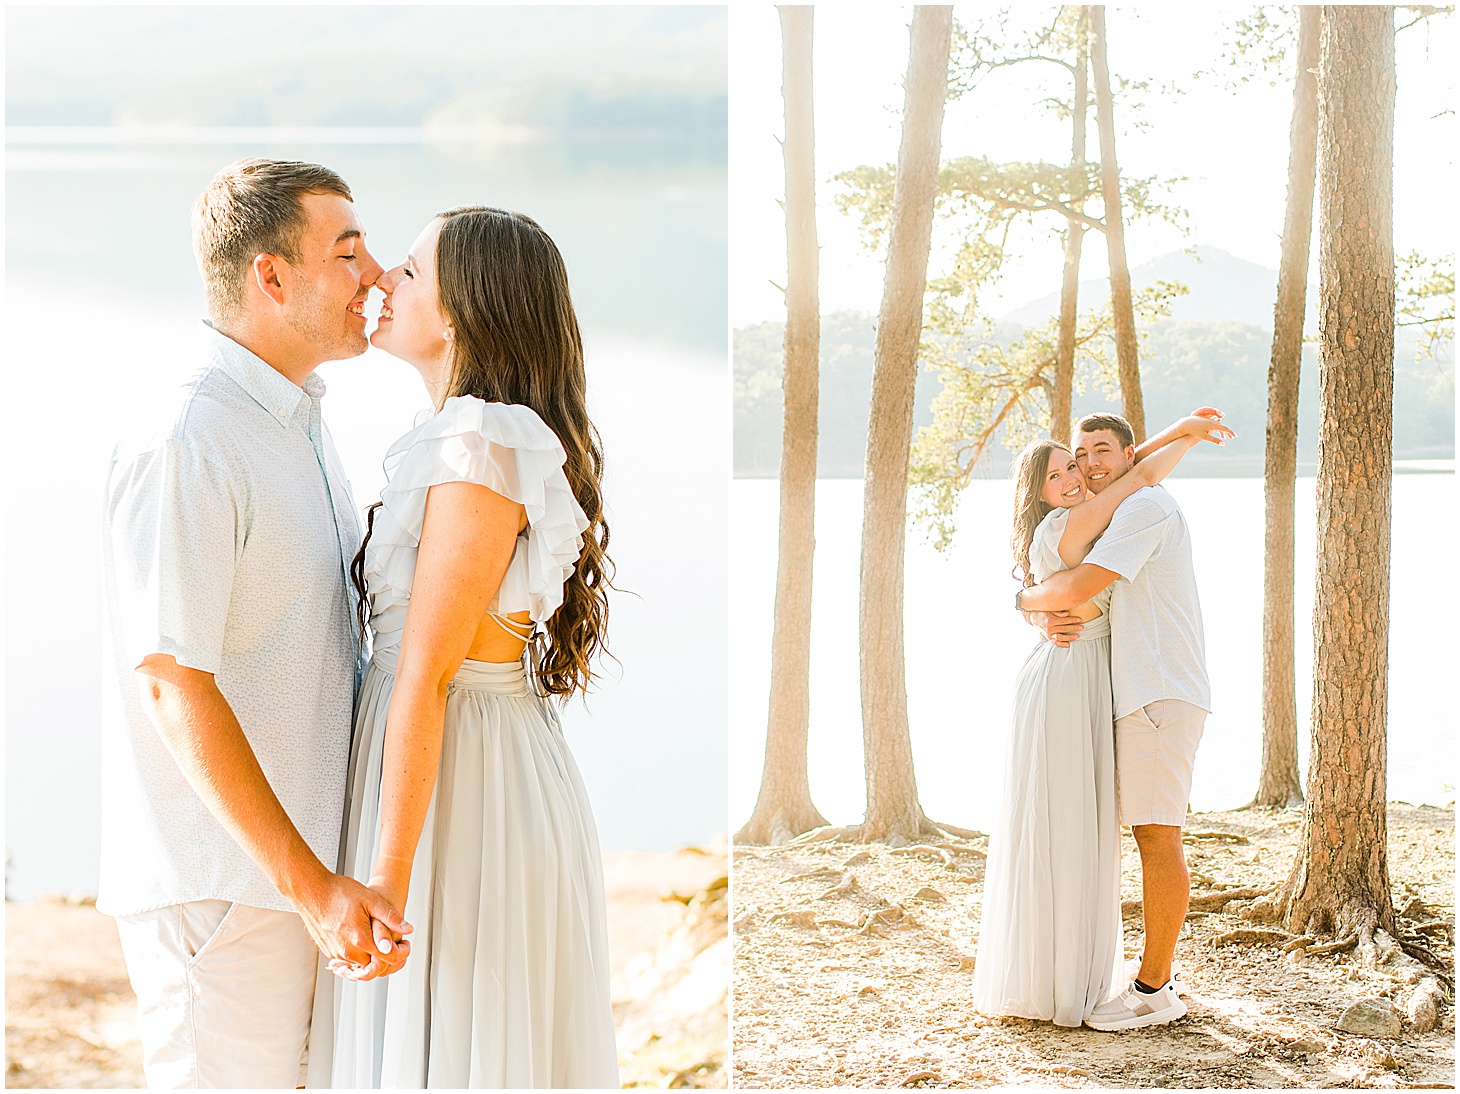 carvinscove_roanokeengagementsession_virginiaweddingphotographer_vaweddingphotographer_photo_0076.jpg